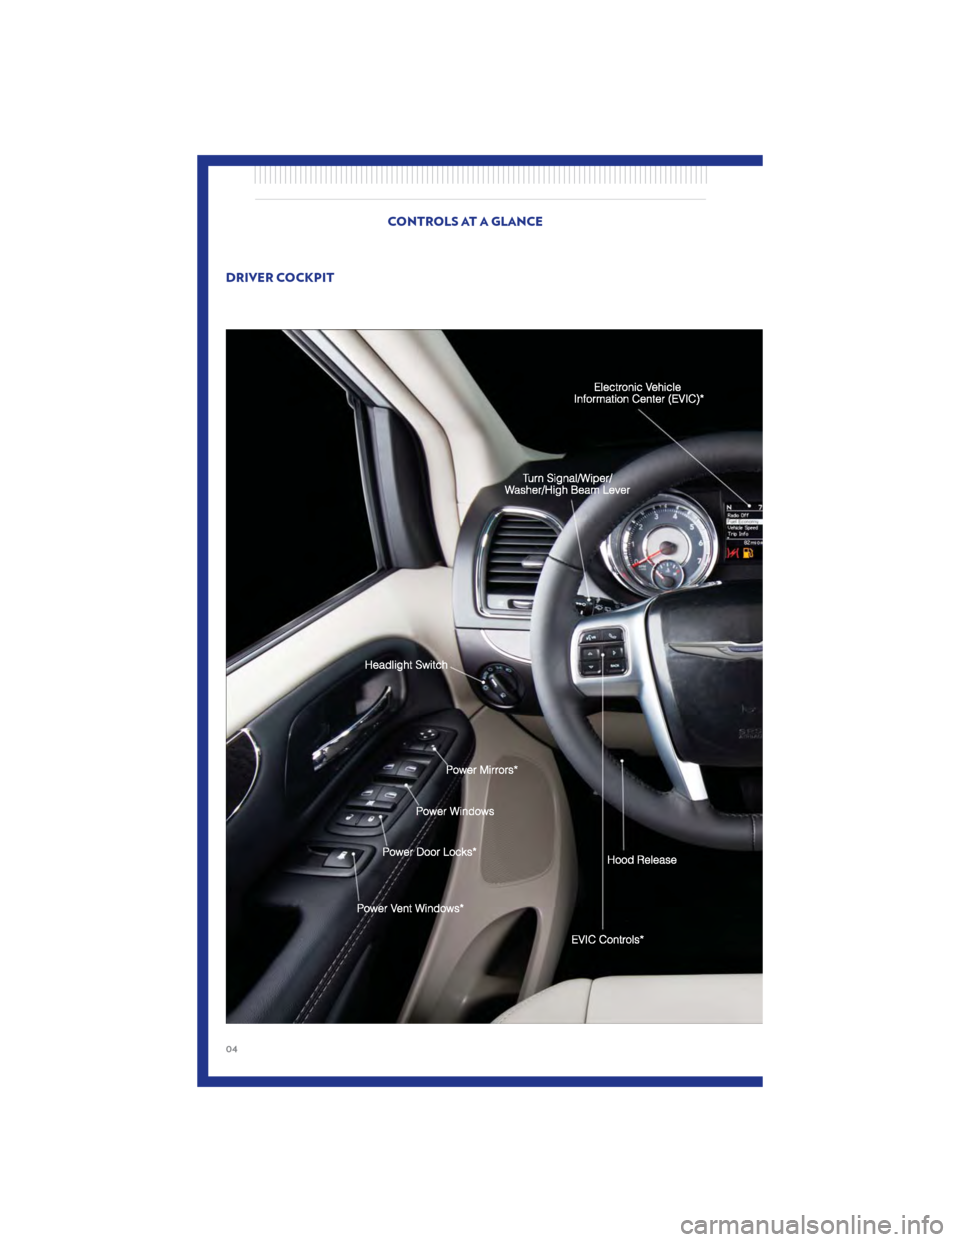 CHRYSLER TOWN AND COUNTRY 2011 5.G User Guide DRIVER COCKPIT
CONTROLS AT A GLANCE
04 